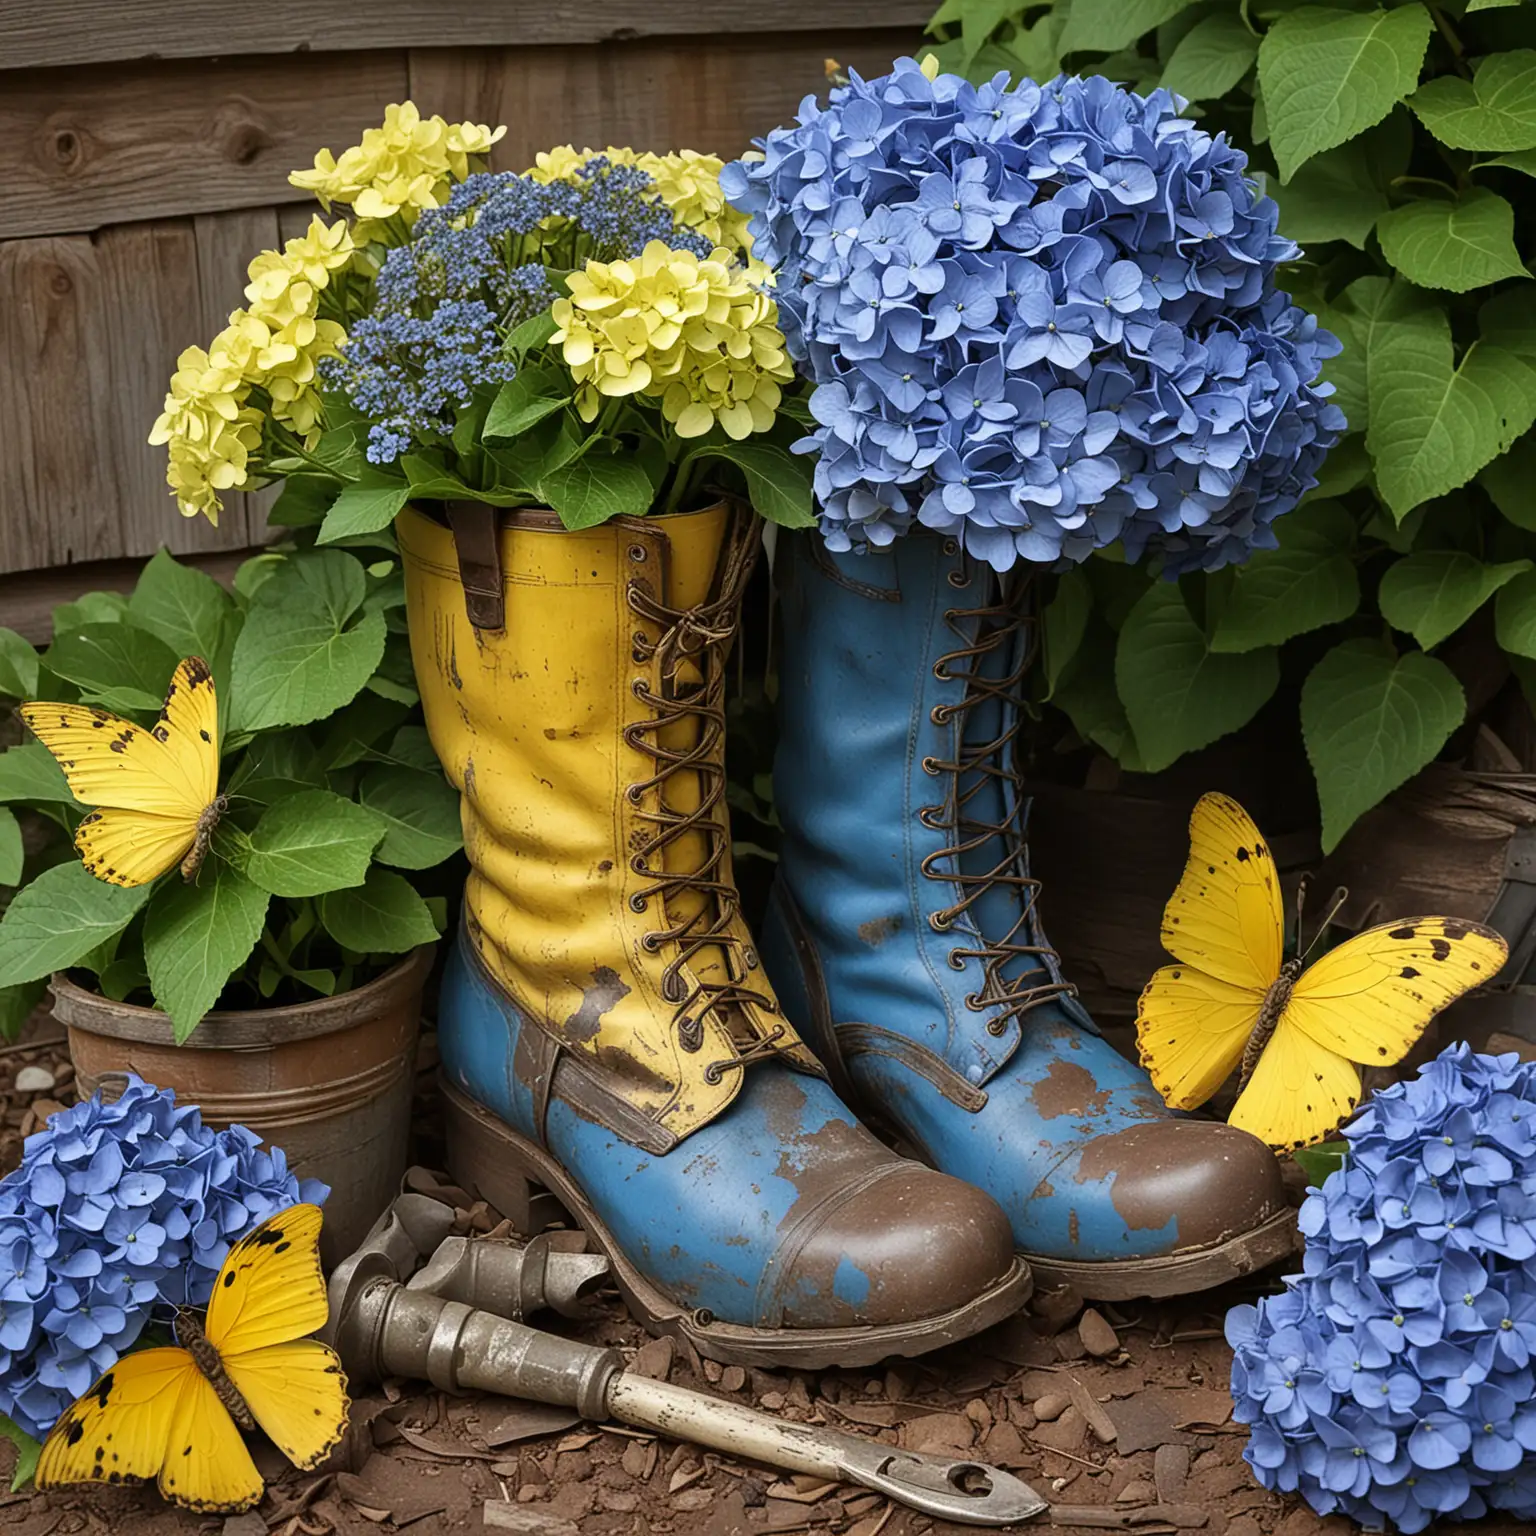 Vintage Garden Boots Overflowing with Blue Hydrangeas and Butterfly